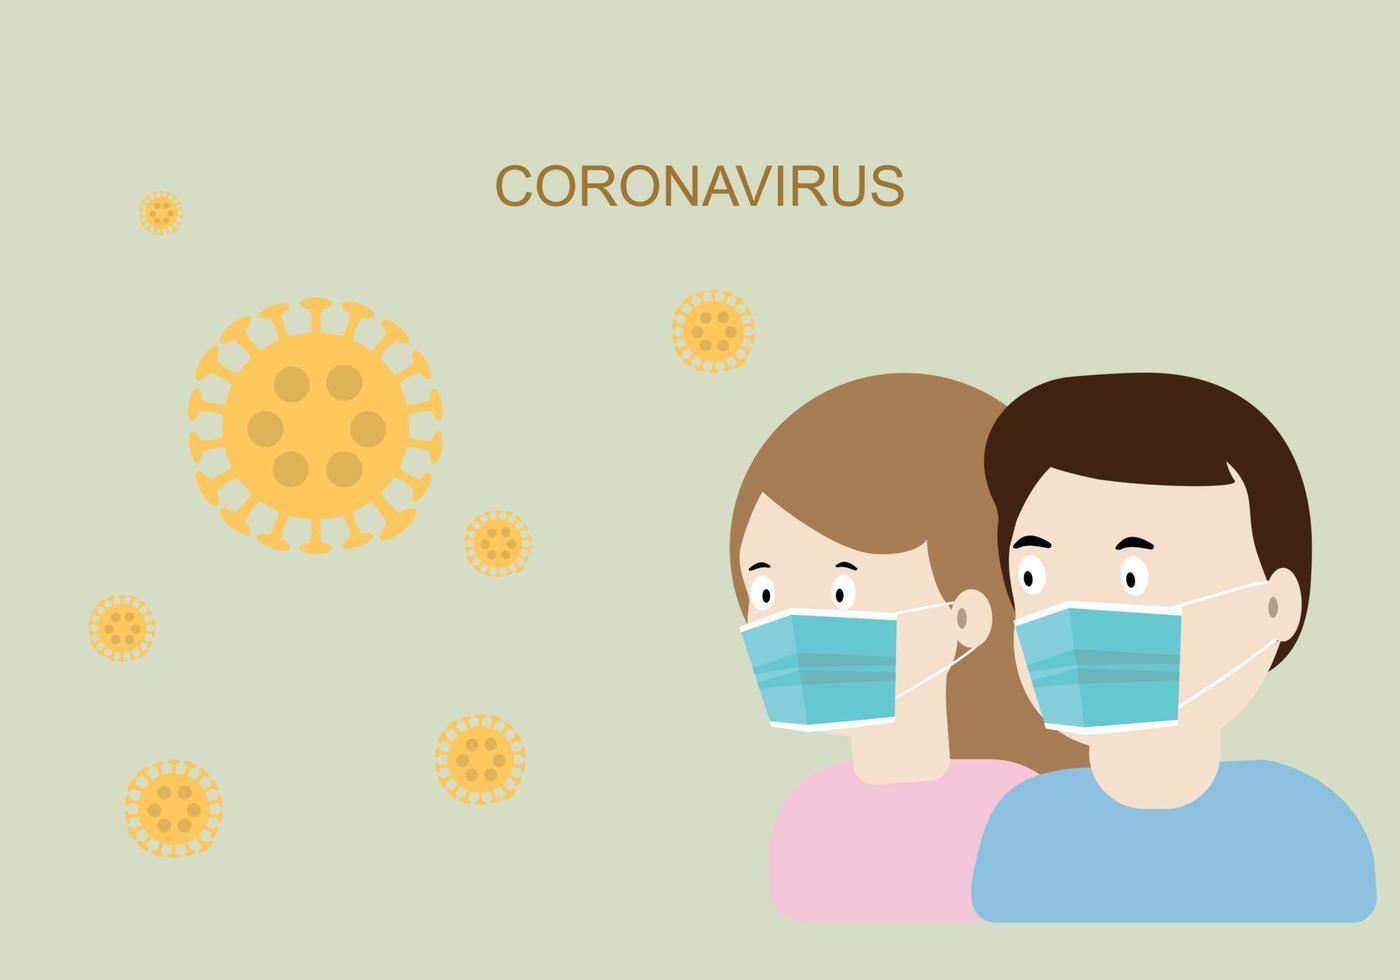 Concepts of wearing protective mask in coronavirus pandemic outbreak vector